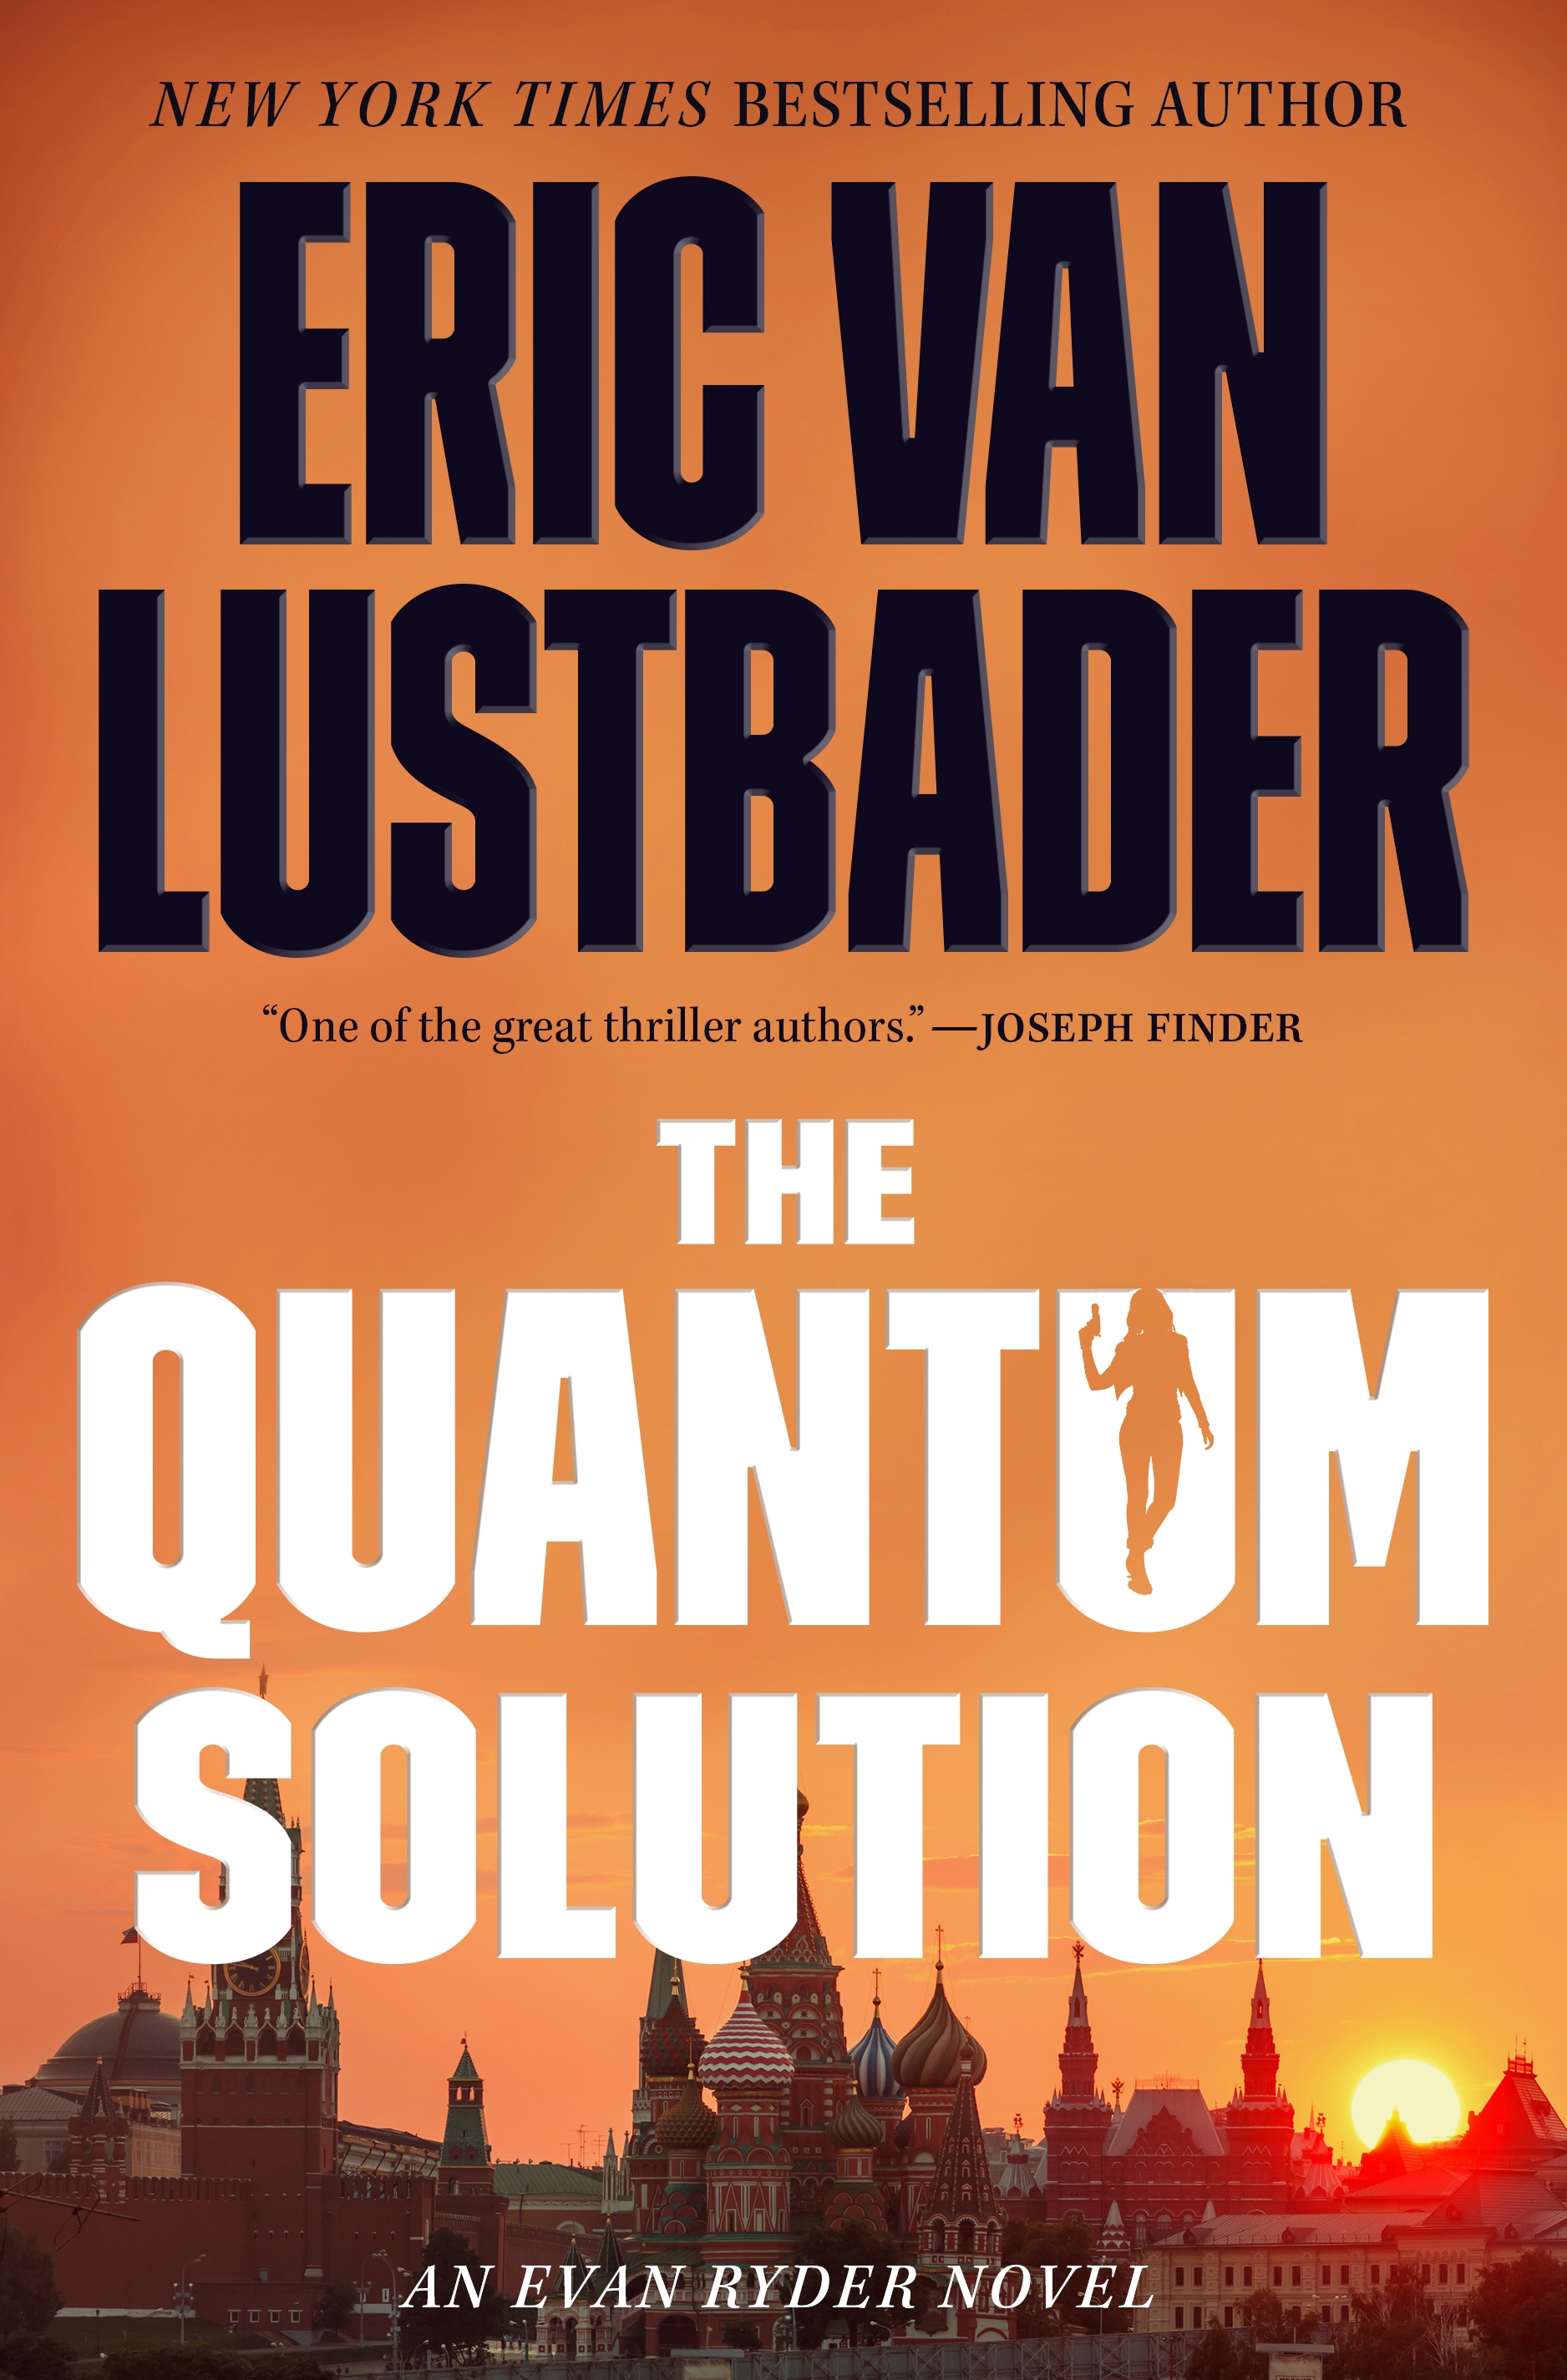 The Quantum Solution : An Evan Ryder Novel by Eric Van Lustbader